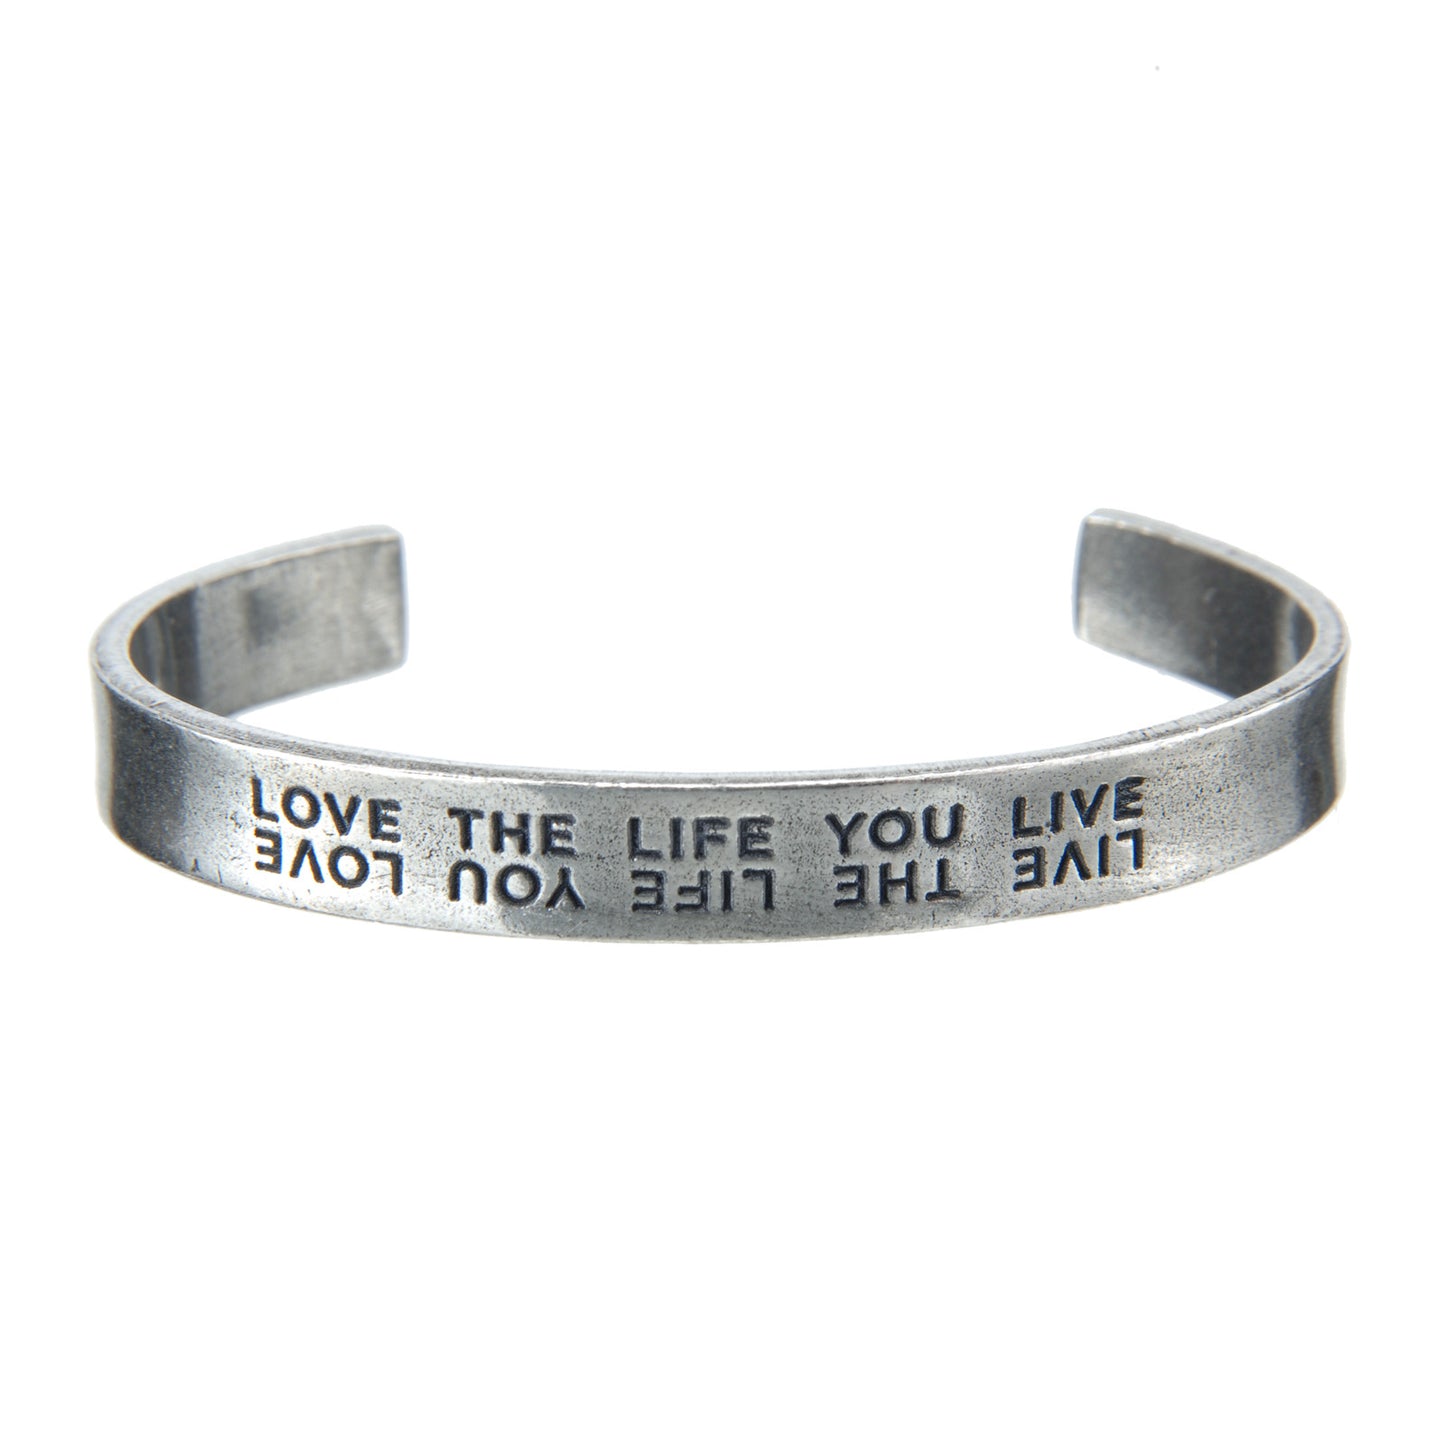 Live the Life You Love Quotable Cuff Bracelet